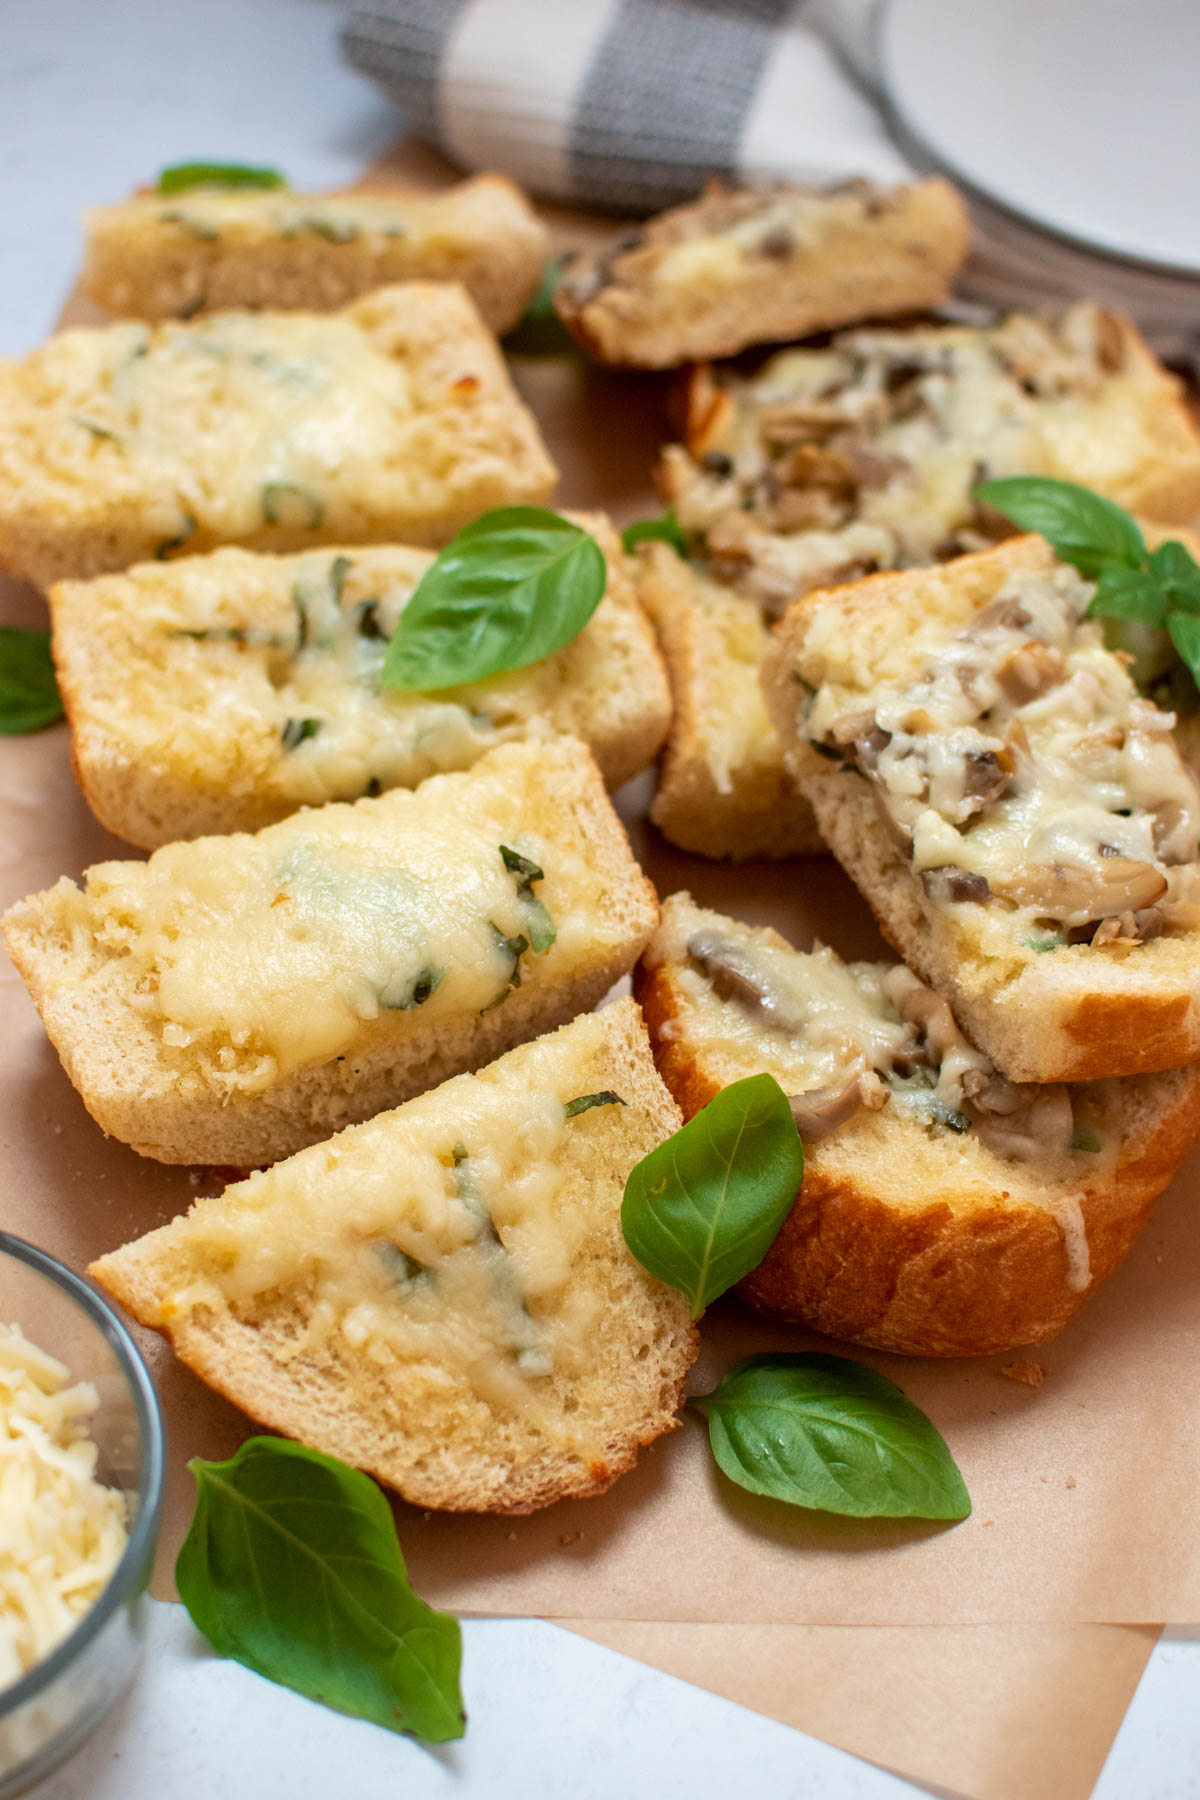 Pieces of cheesy bread with basil leaves on brown parchment paper.